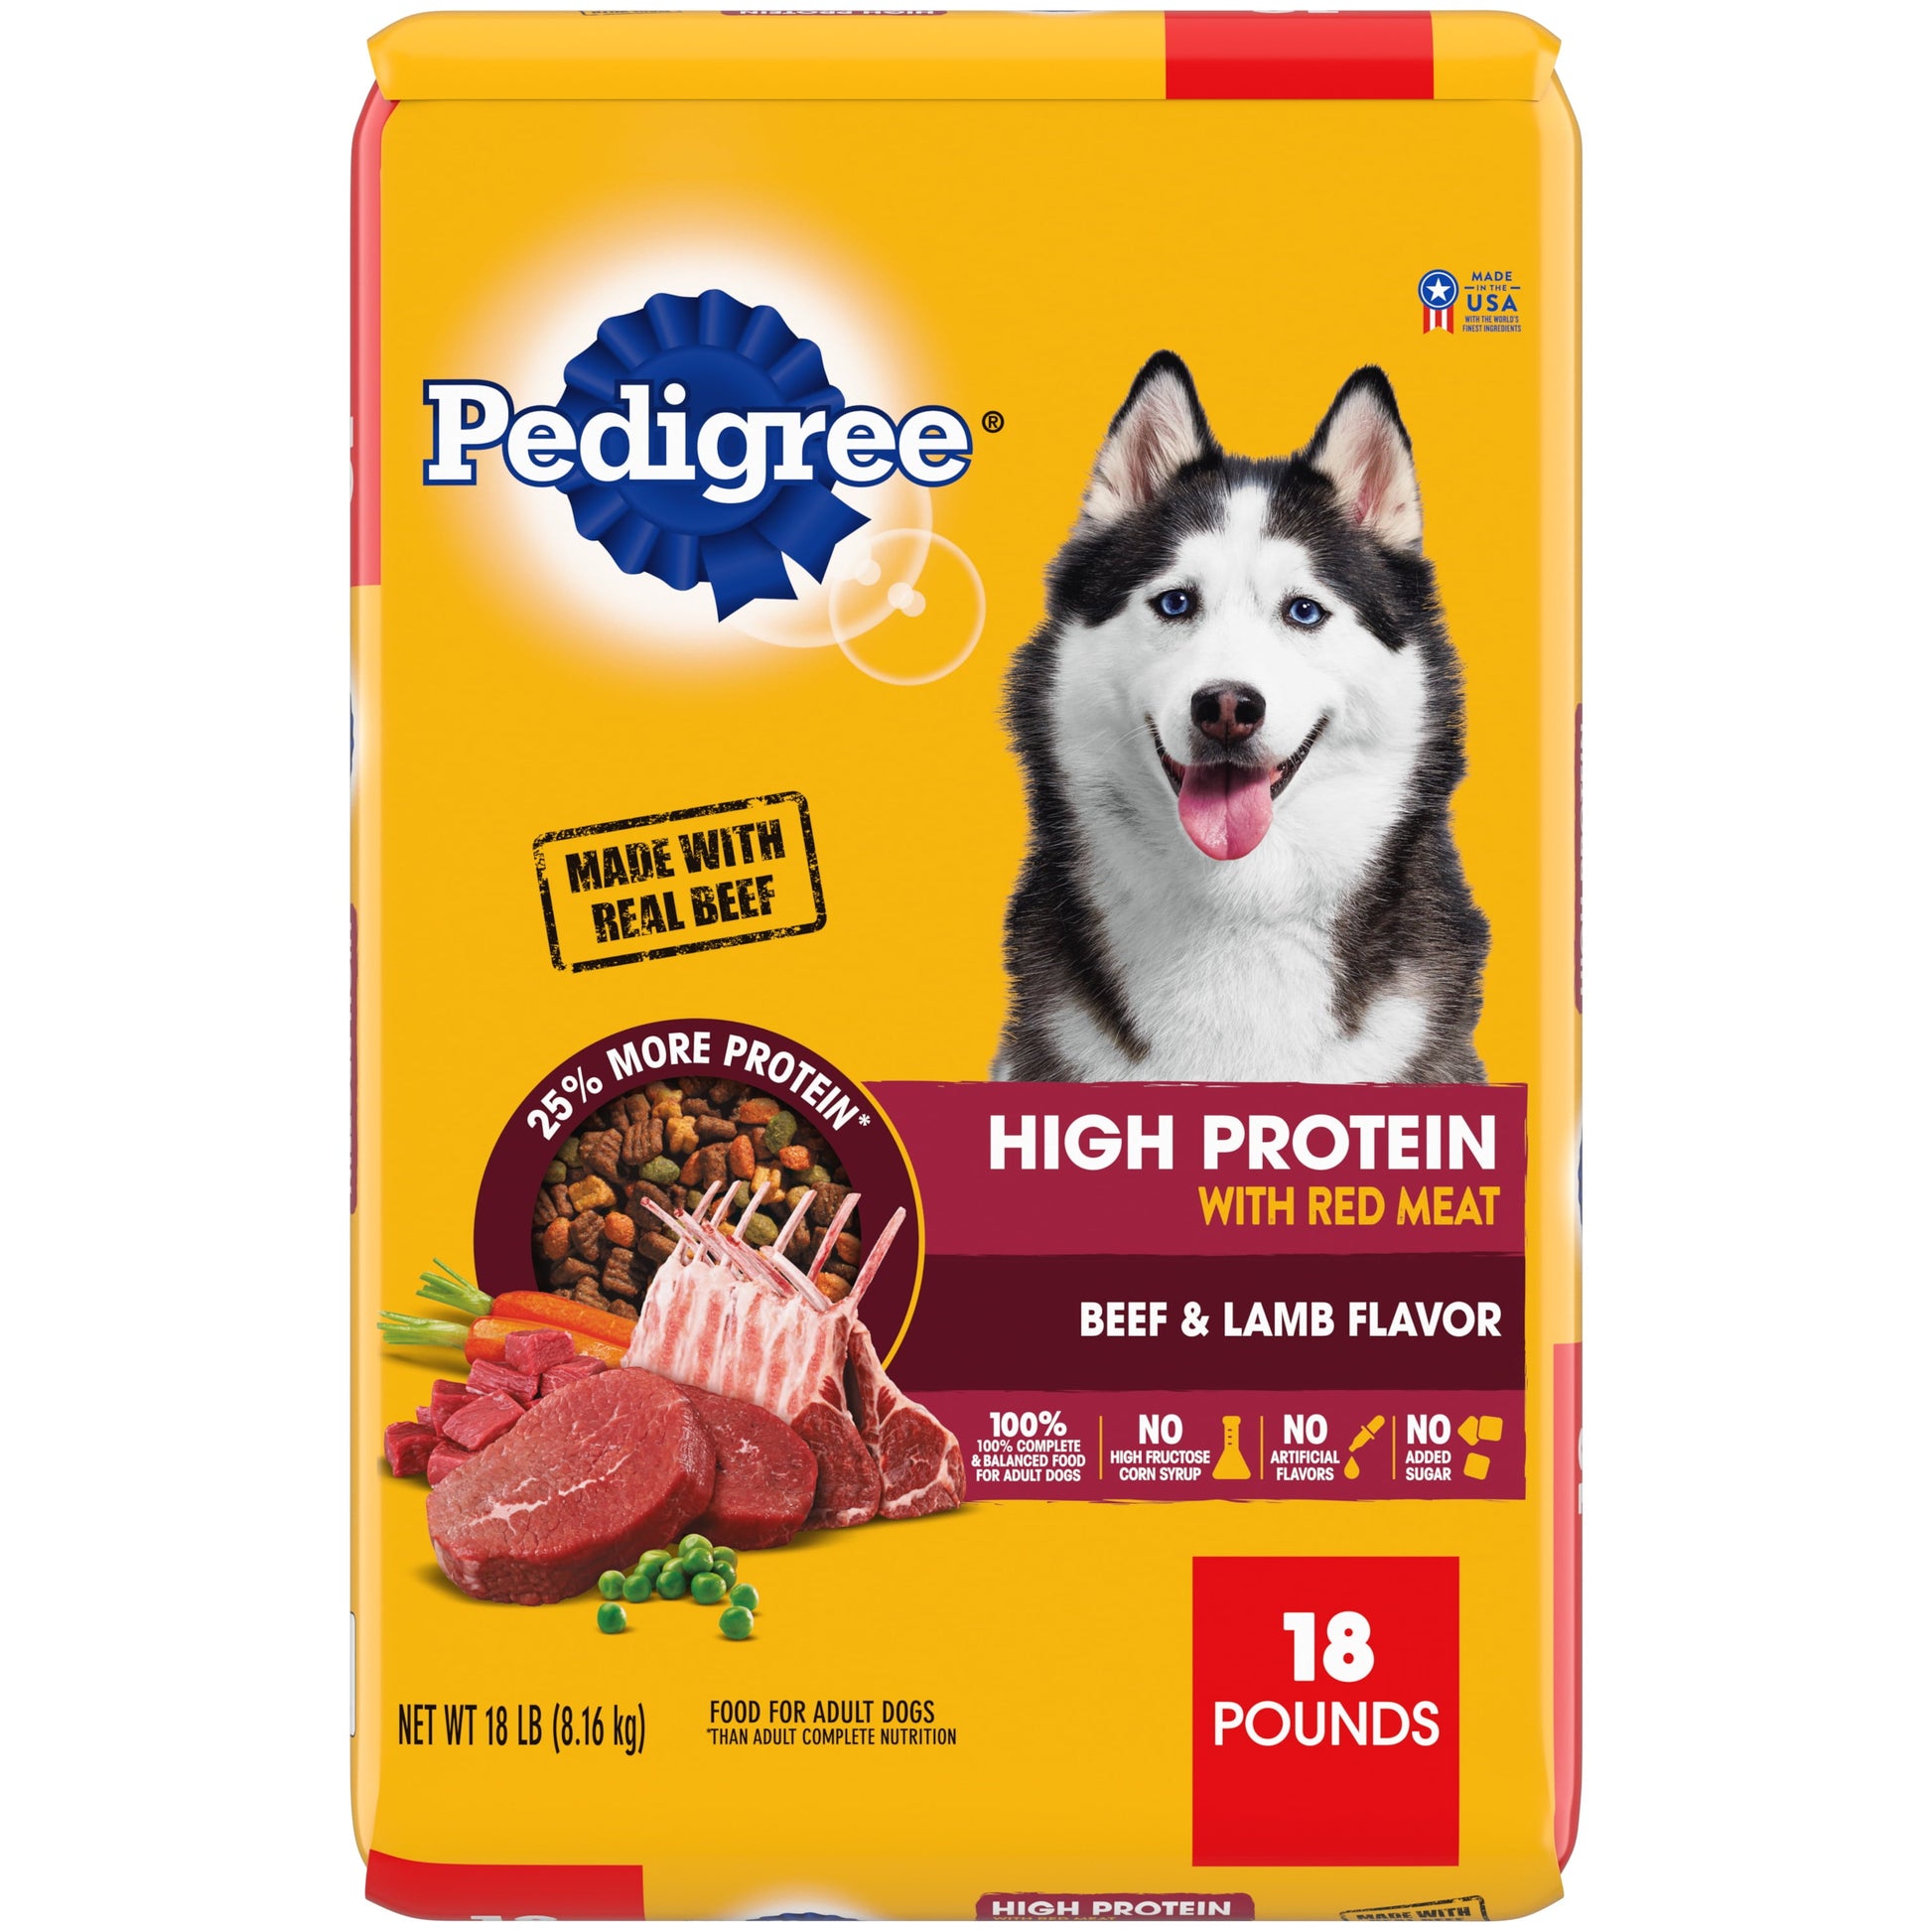 is a high protein diet good for older dogs